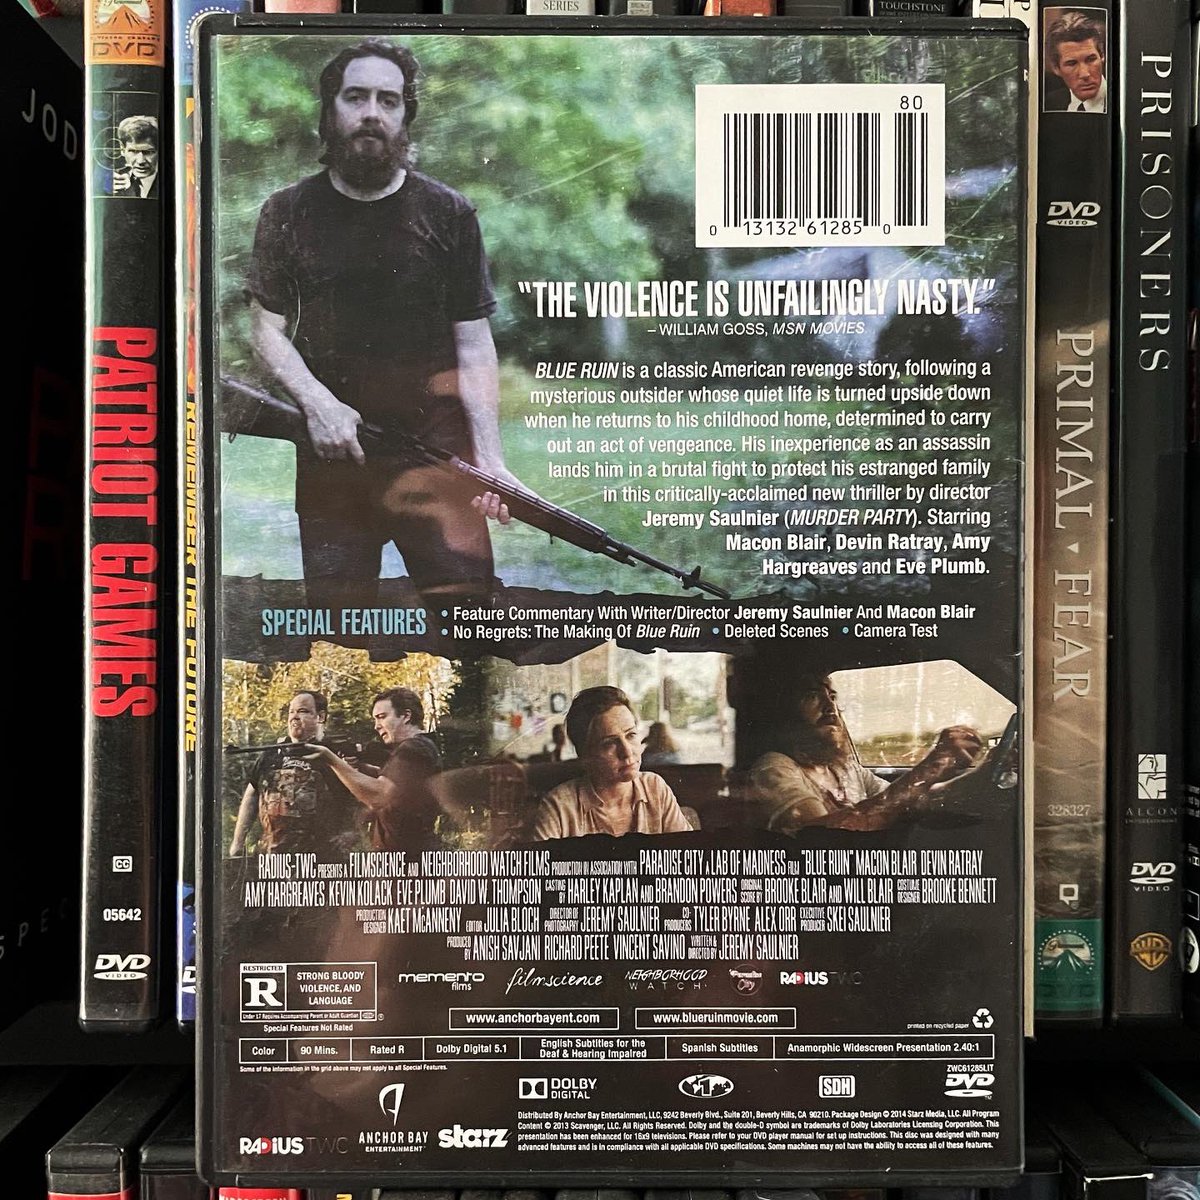 “I'd forgive you if you were crazy, but you're not. You're weak”
#blueruin #2013movie #2010scinema #jeremysaulnier #maconblair #devinratray #amyhargreaves #eveplumb #davidwthompson #revengemovies #dvd #dvdcollection #dvdcollector #dvdcover #retromedia #deadmedia #moviecollector